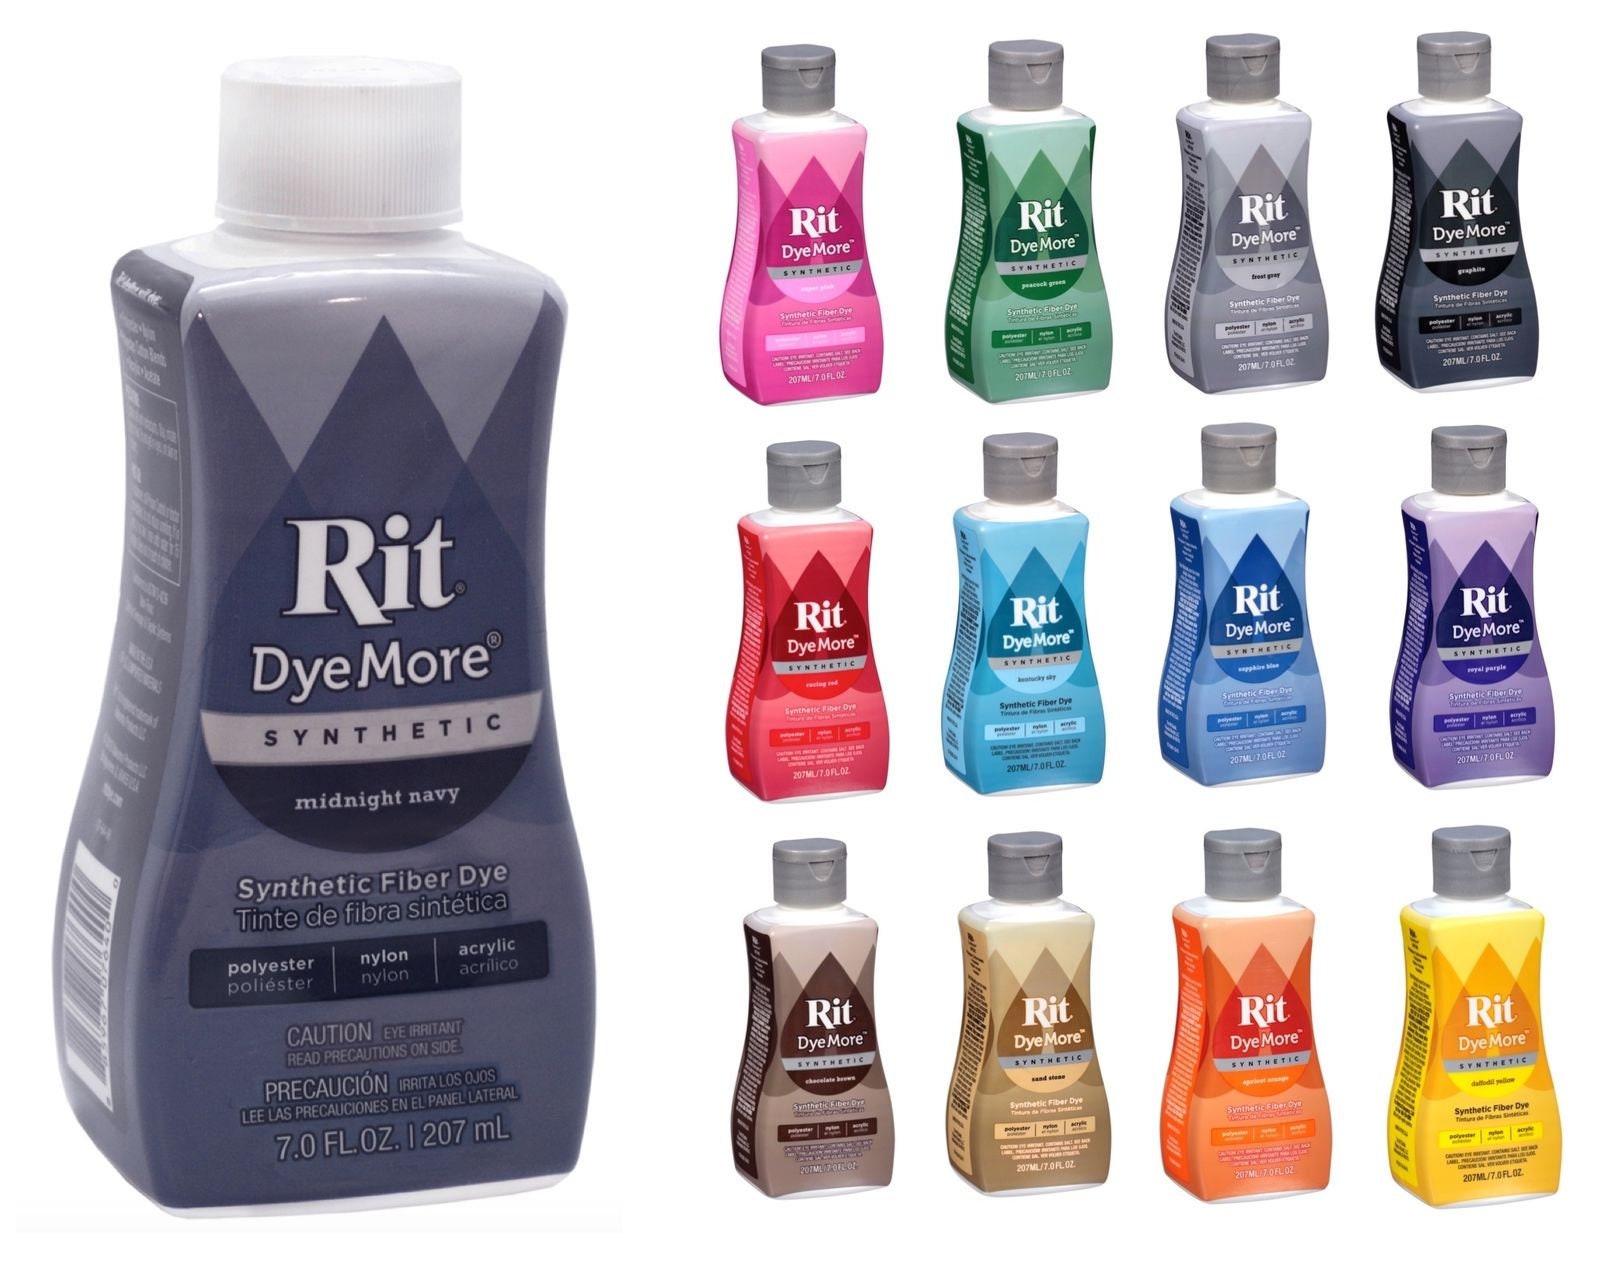 6 Rit Dyemore Assortment Kit - Pick Your Own Colors